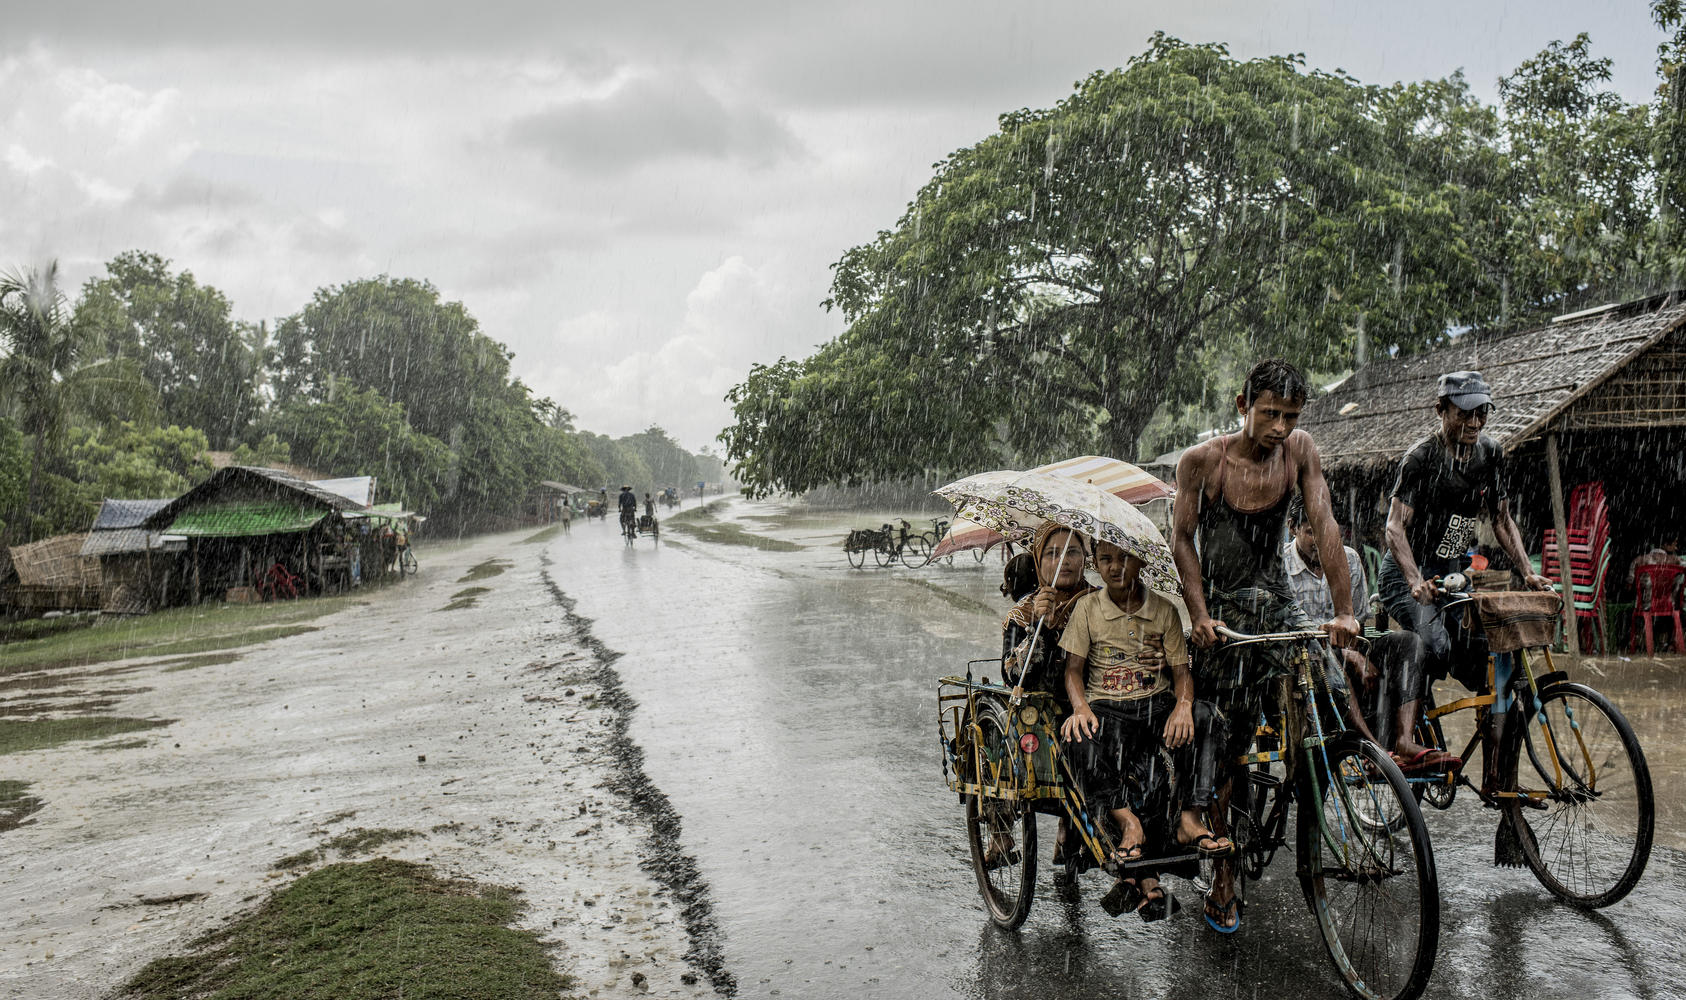 Rickshaws during monsoon rains at a camp for Rohingya in Sittwe. The government says it is determined to stop the migrants fleeing religious persecution, but it will not address the conditions driving the exodus. Photo Courtesy of the New York Times/Tomas Munita